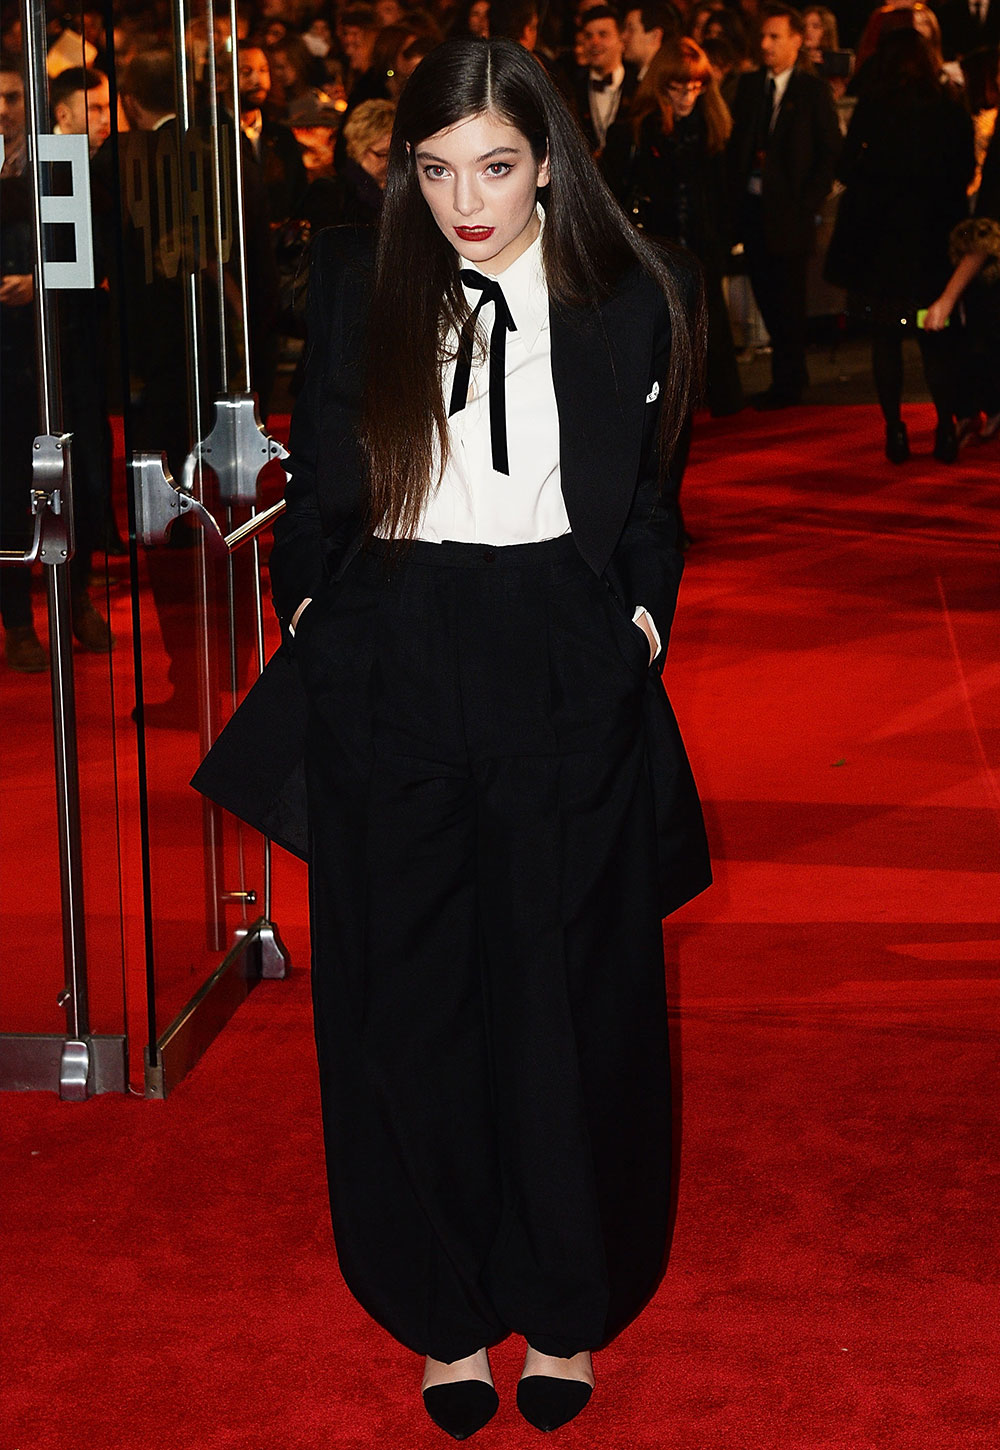 Lorde attended the World Premiere of The Hunger Games Mockingjay Part 1 on November 10, 2014 in London. Her song, Yellow Flicker Beat, was the soundtrack's lead single. The then 18-year-old wore an oversized tuxedo from Schiaparelli's Spring 2014 Couture collection.